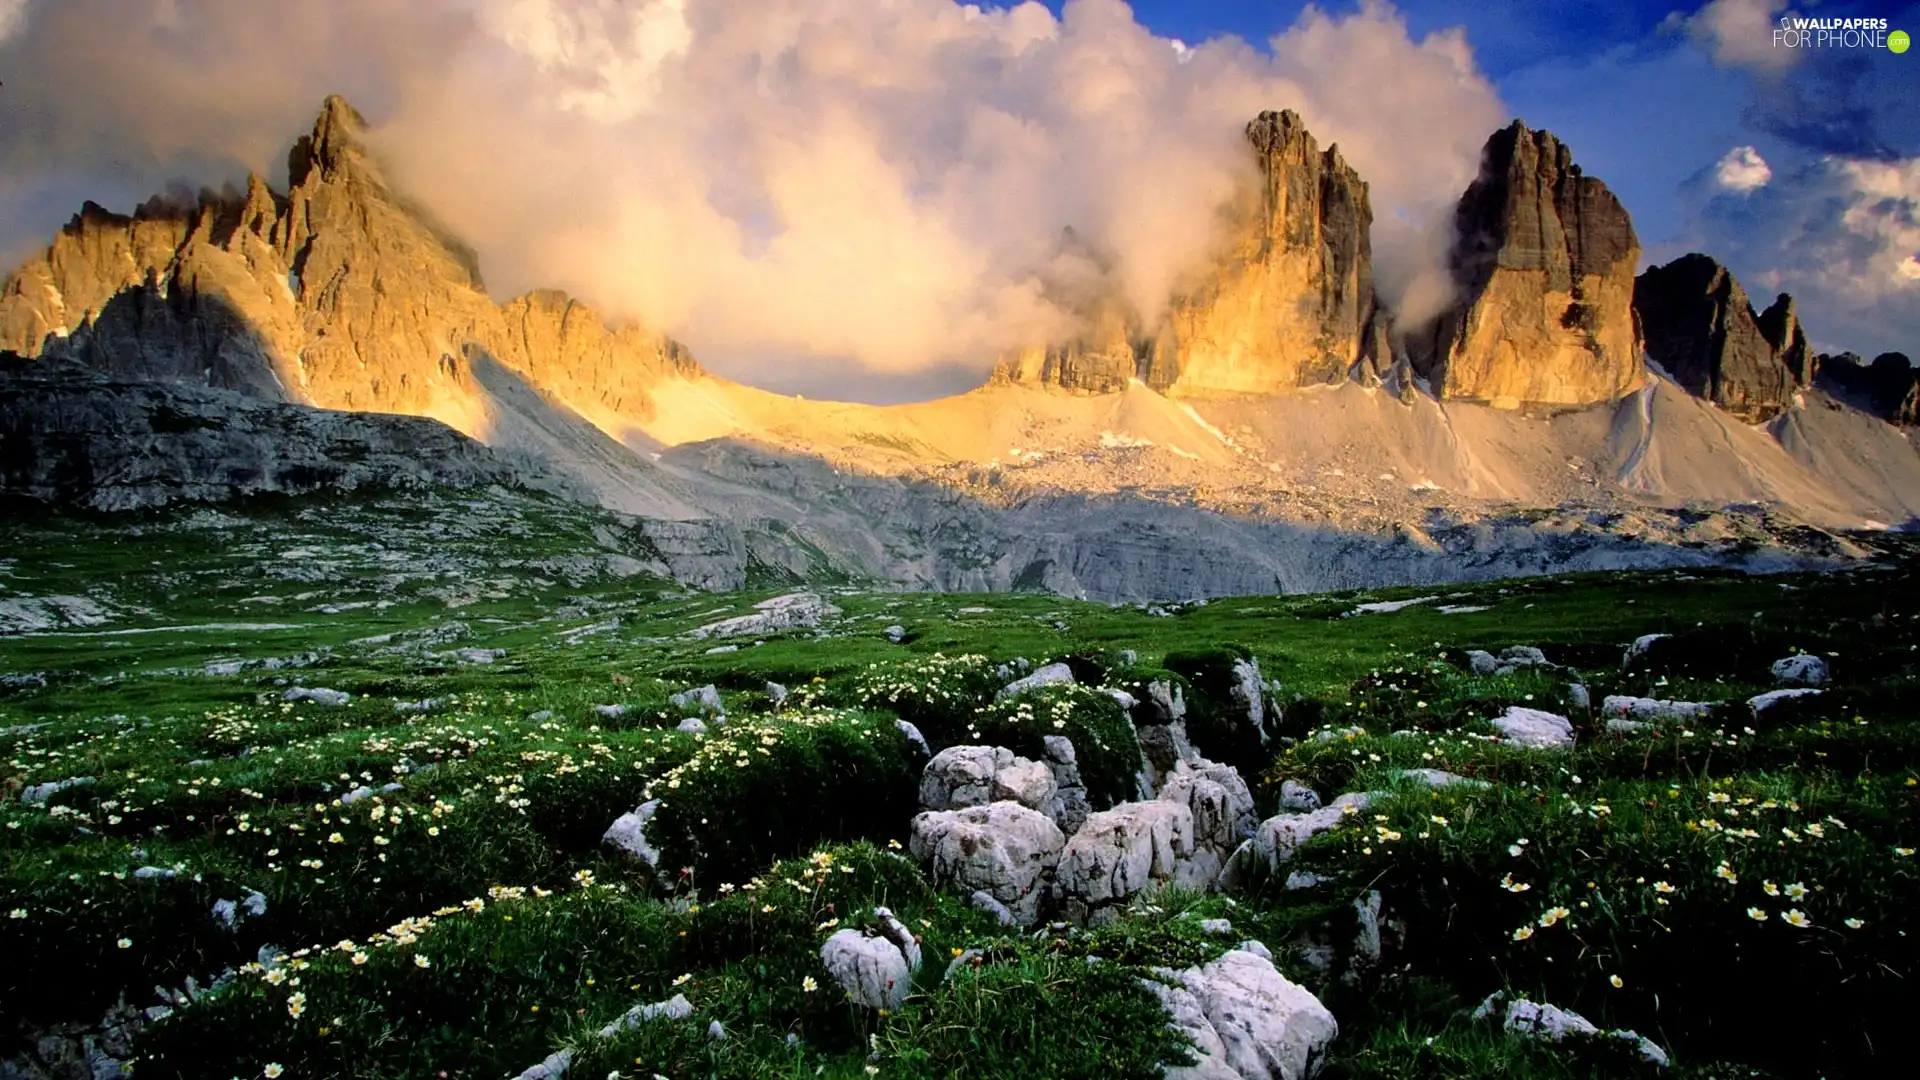 rocks, Meadow, clouds, Mountains